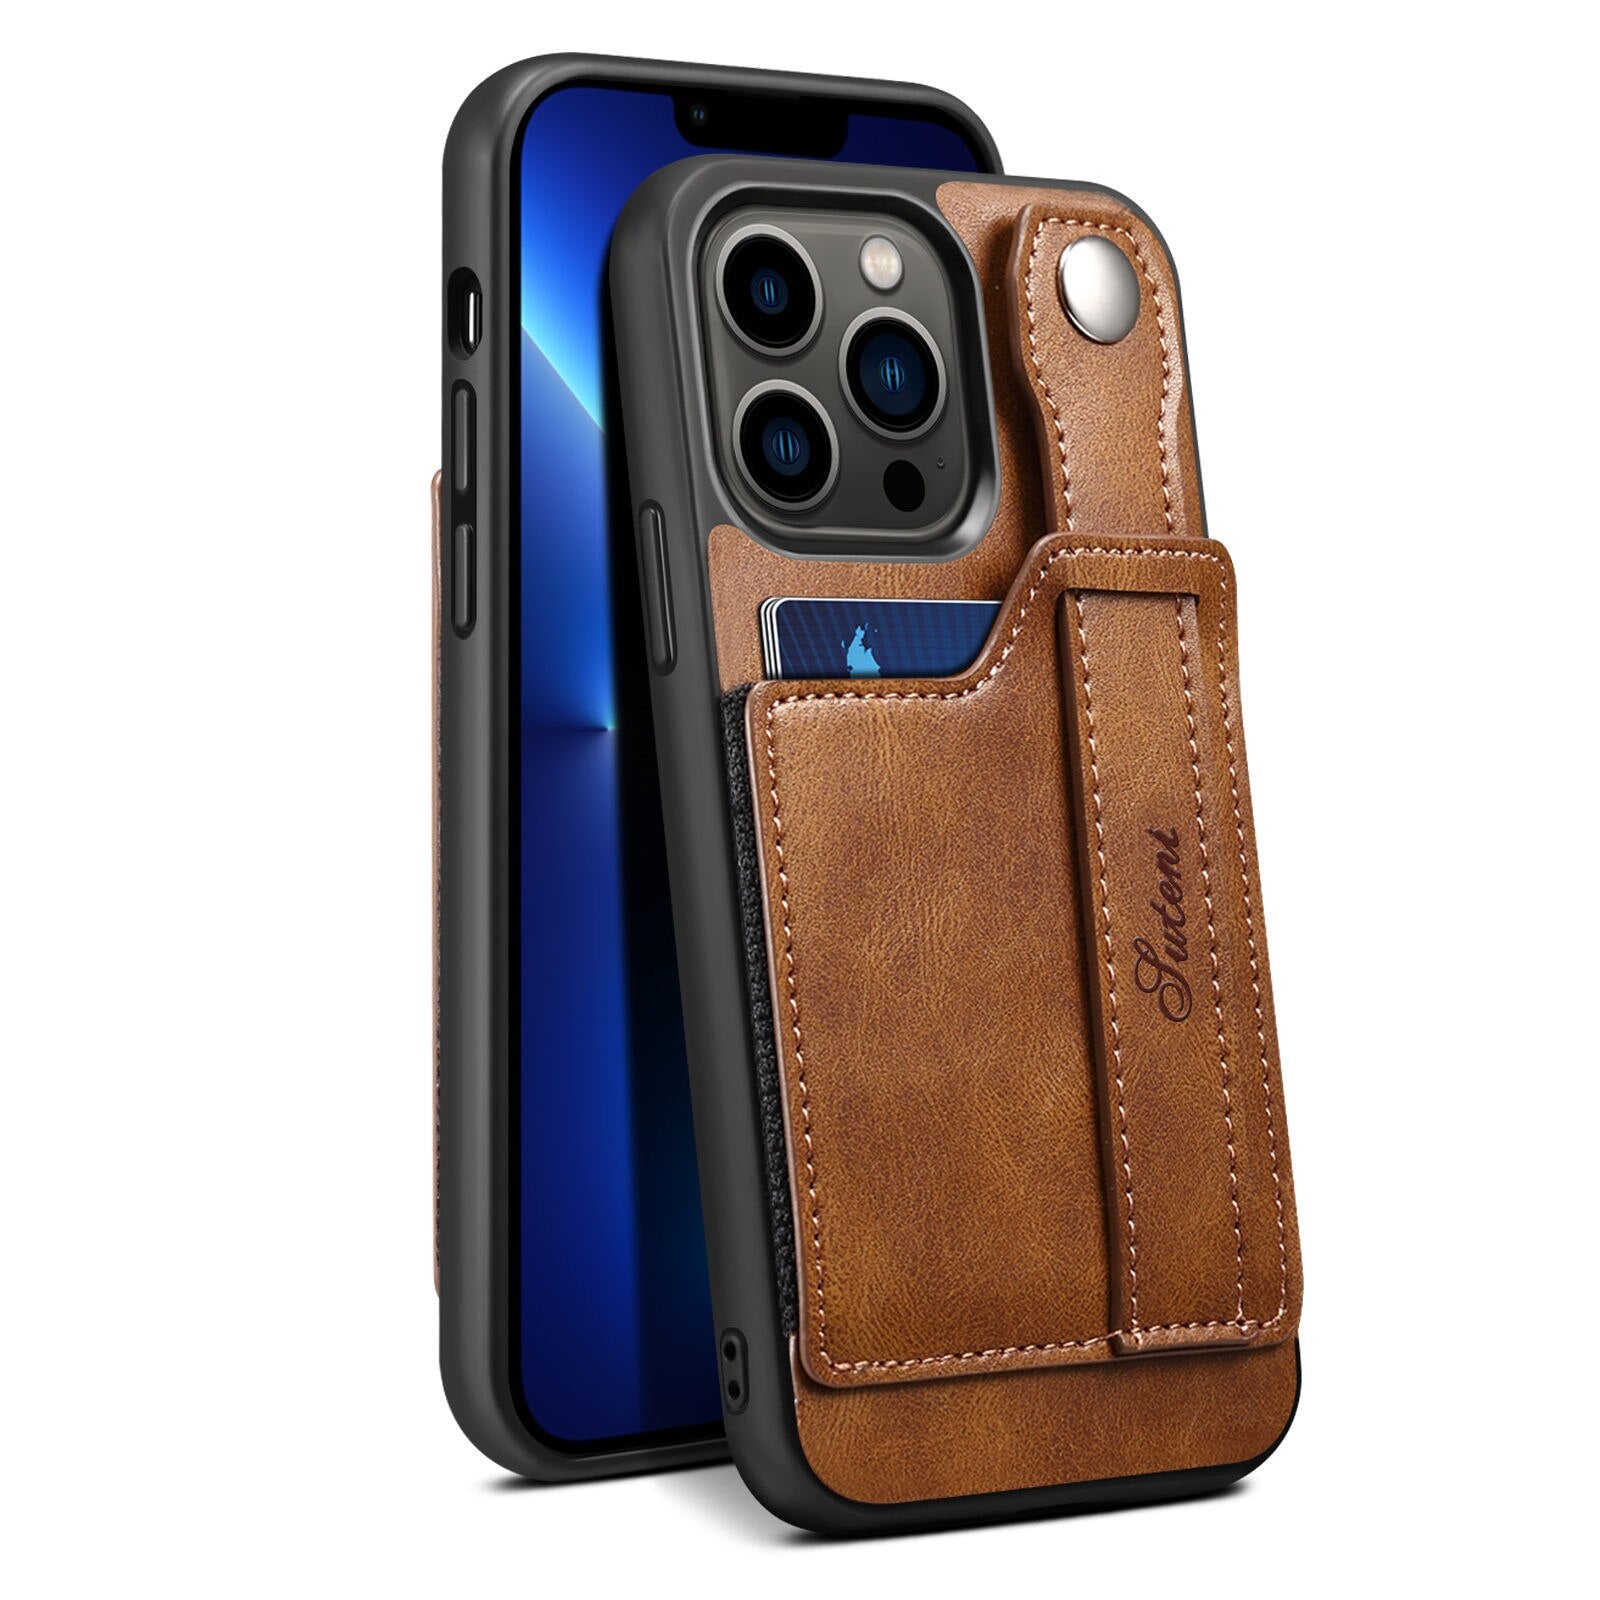 Case For iPhone 14 Pro Max Case PU Leather Wallet Flip Cover Stand Feature with Wrist Strap and Credit Cards Pocket for iPhone 14 Pro - 0 For iPhone 14 / Brown / United States Find Epic Store